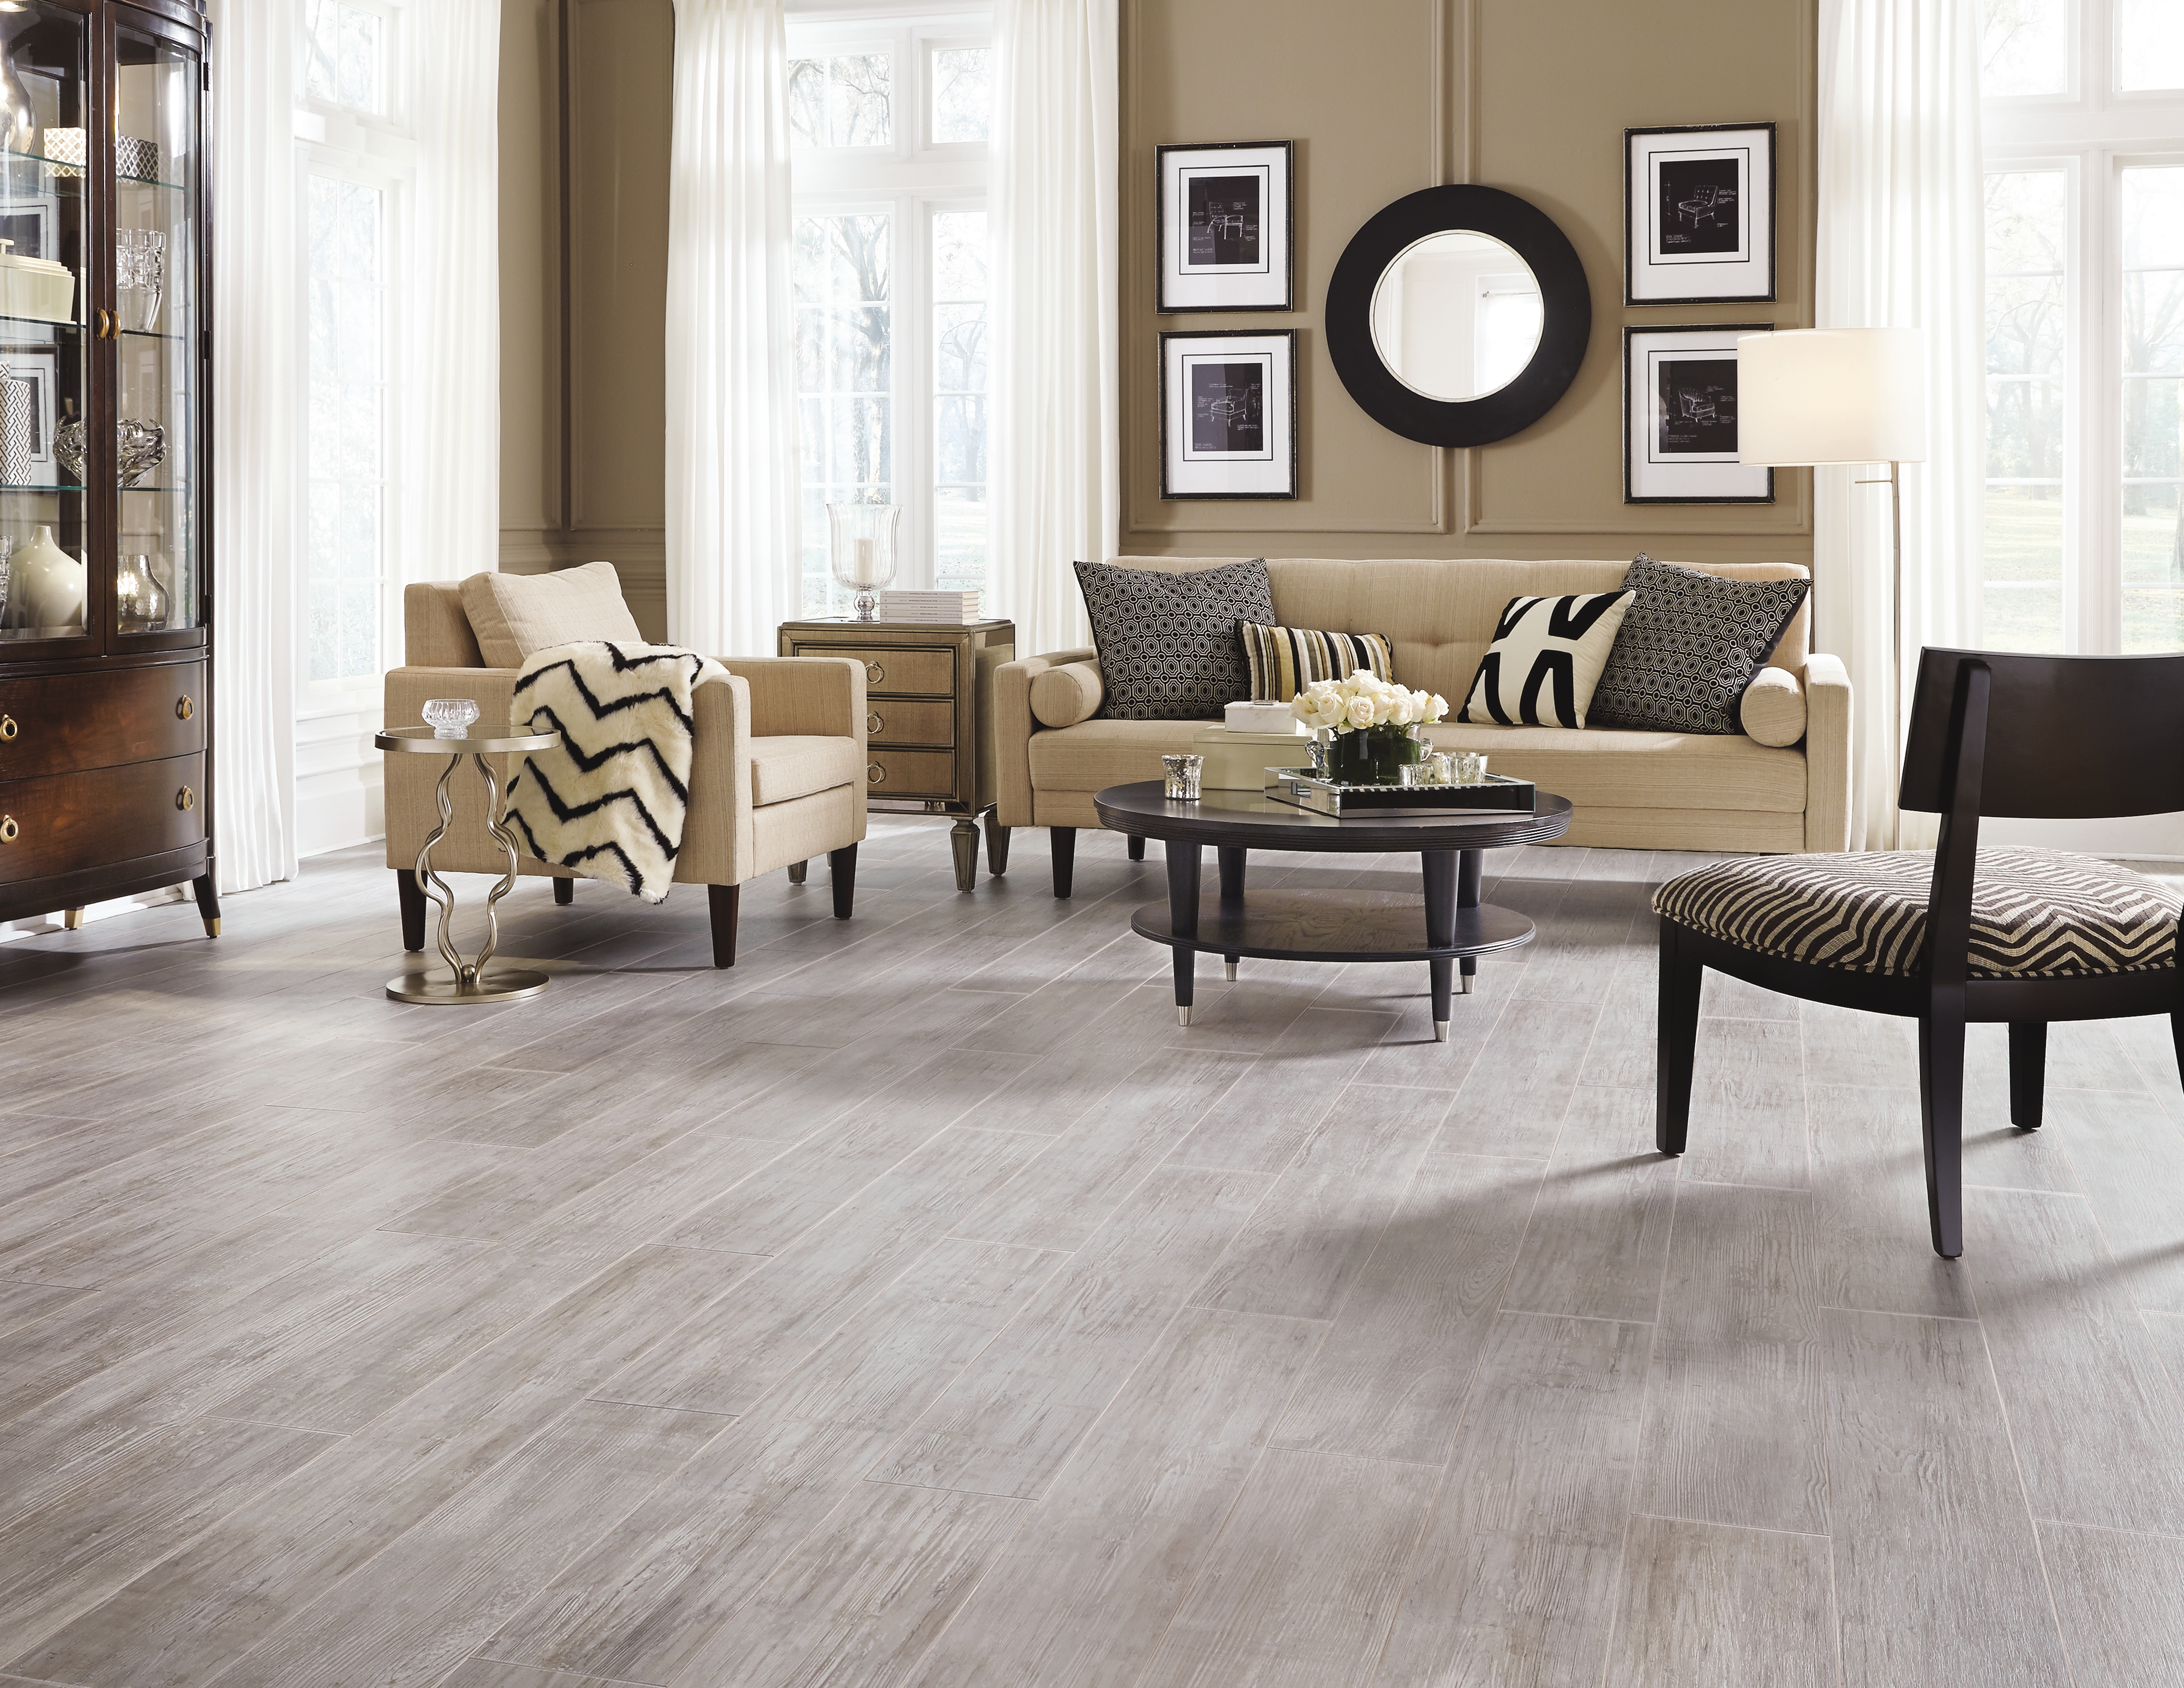 The Key to Long-Lasting Laminate is Decoding the Correct Underlayment Selection